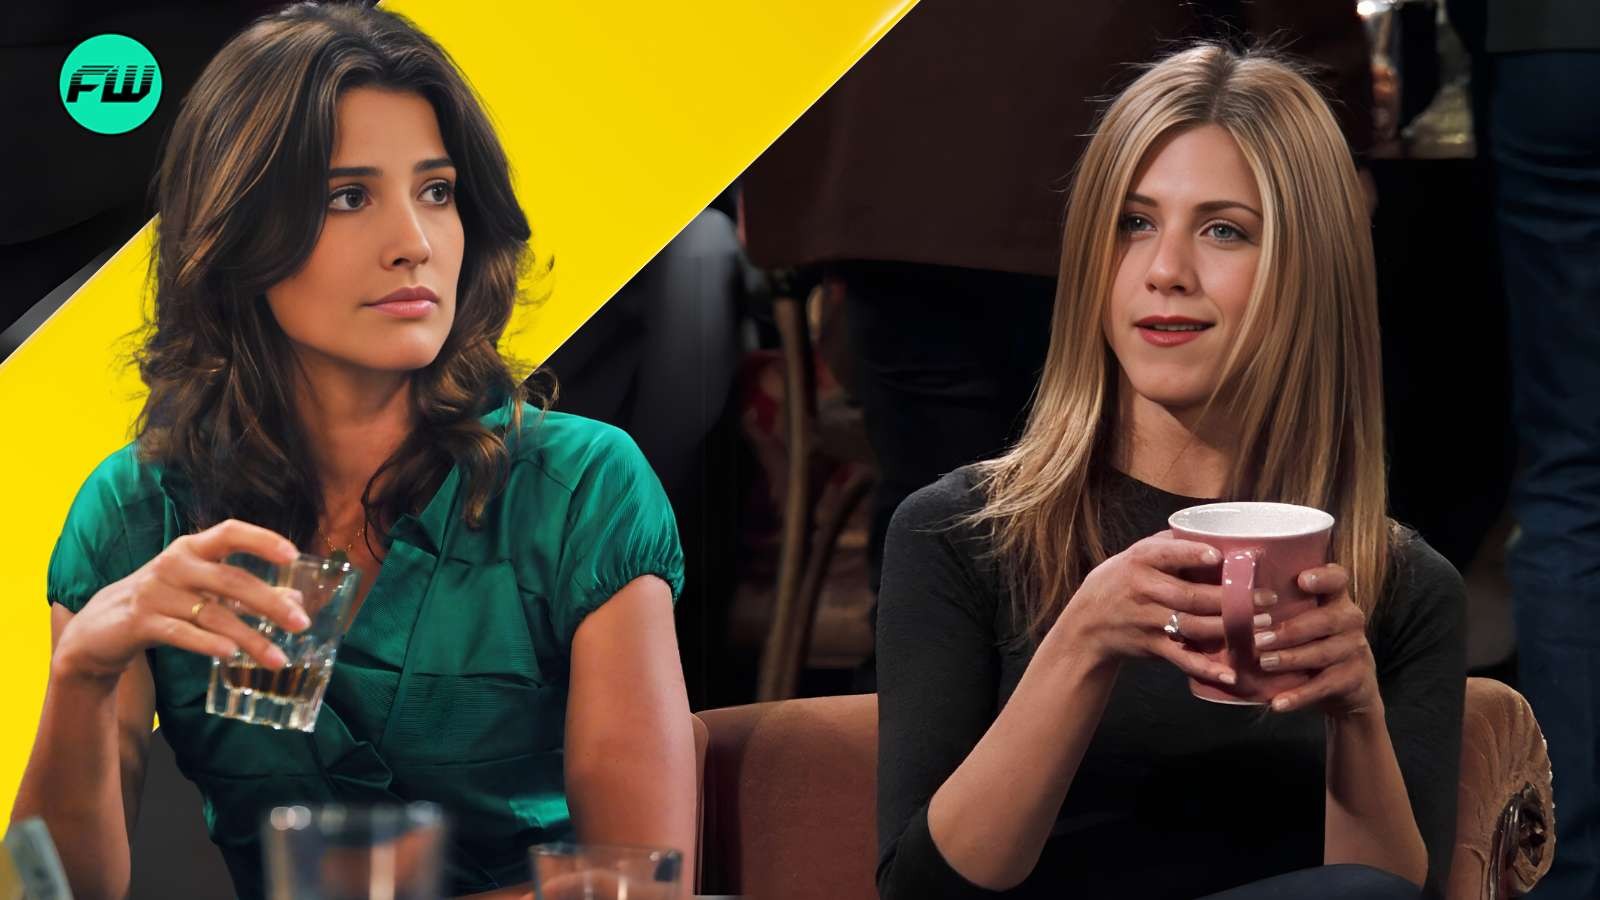 Cobie Smulders as Robin in How I Met Your Mother and Jennifer Aniston as Rachel in Friends